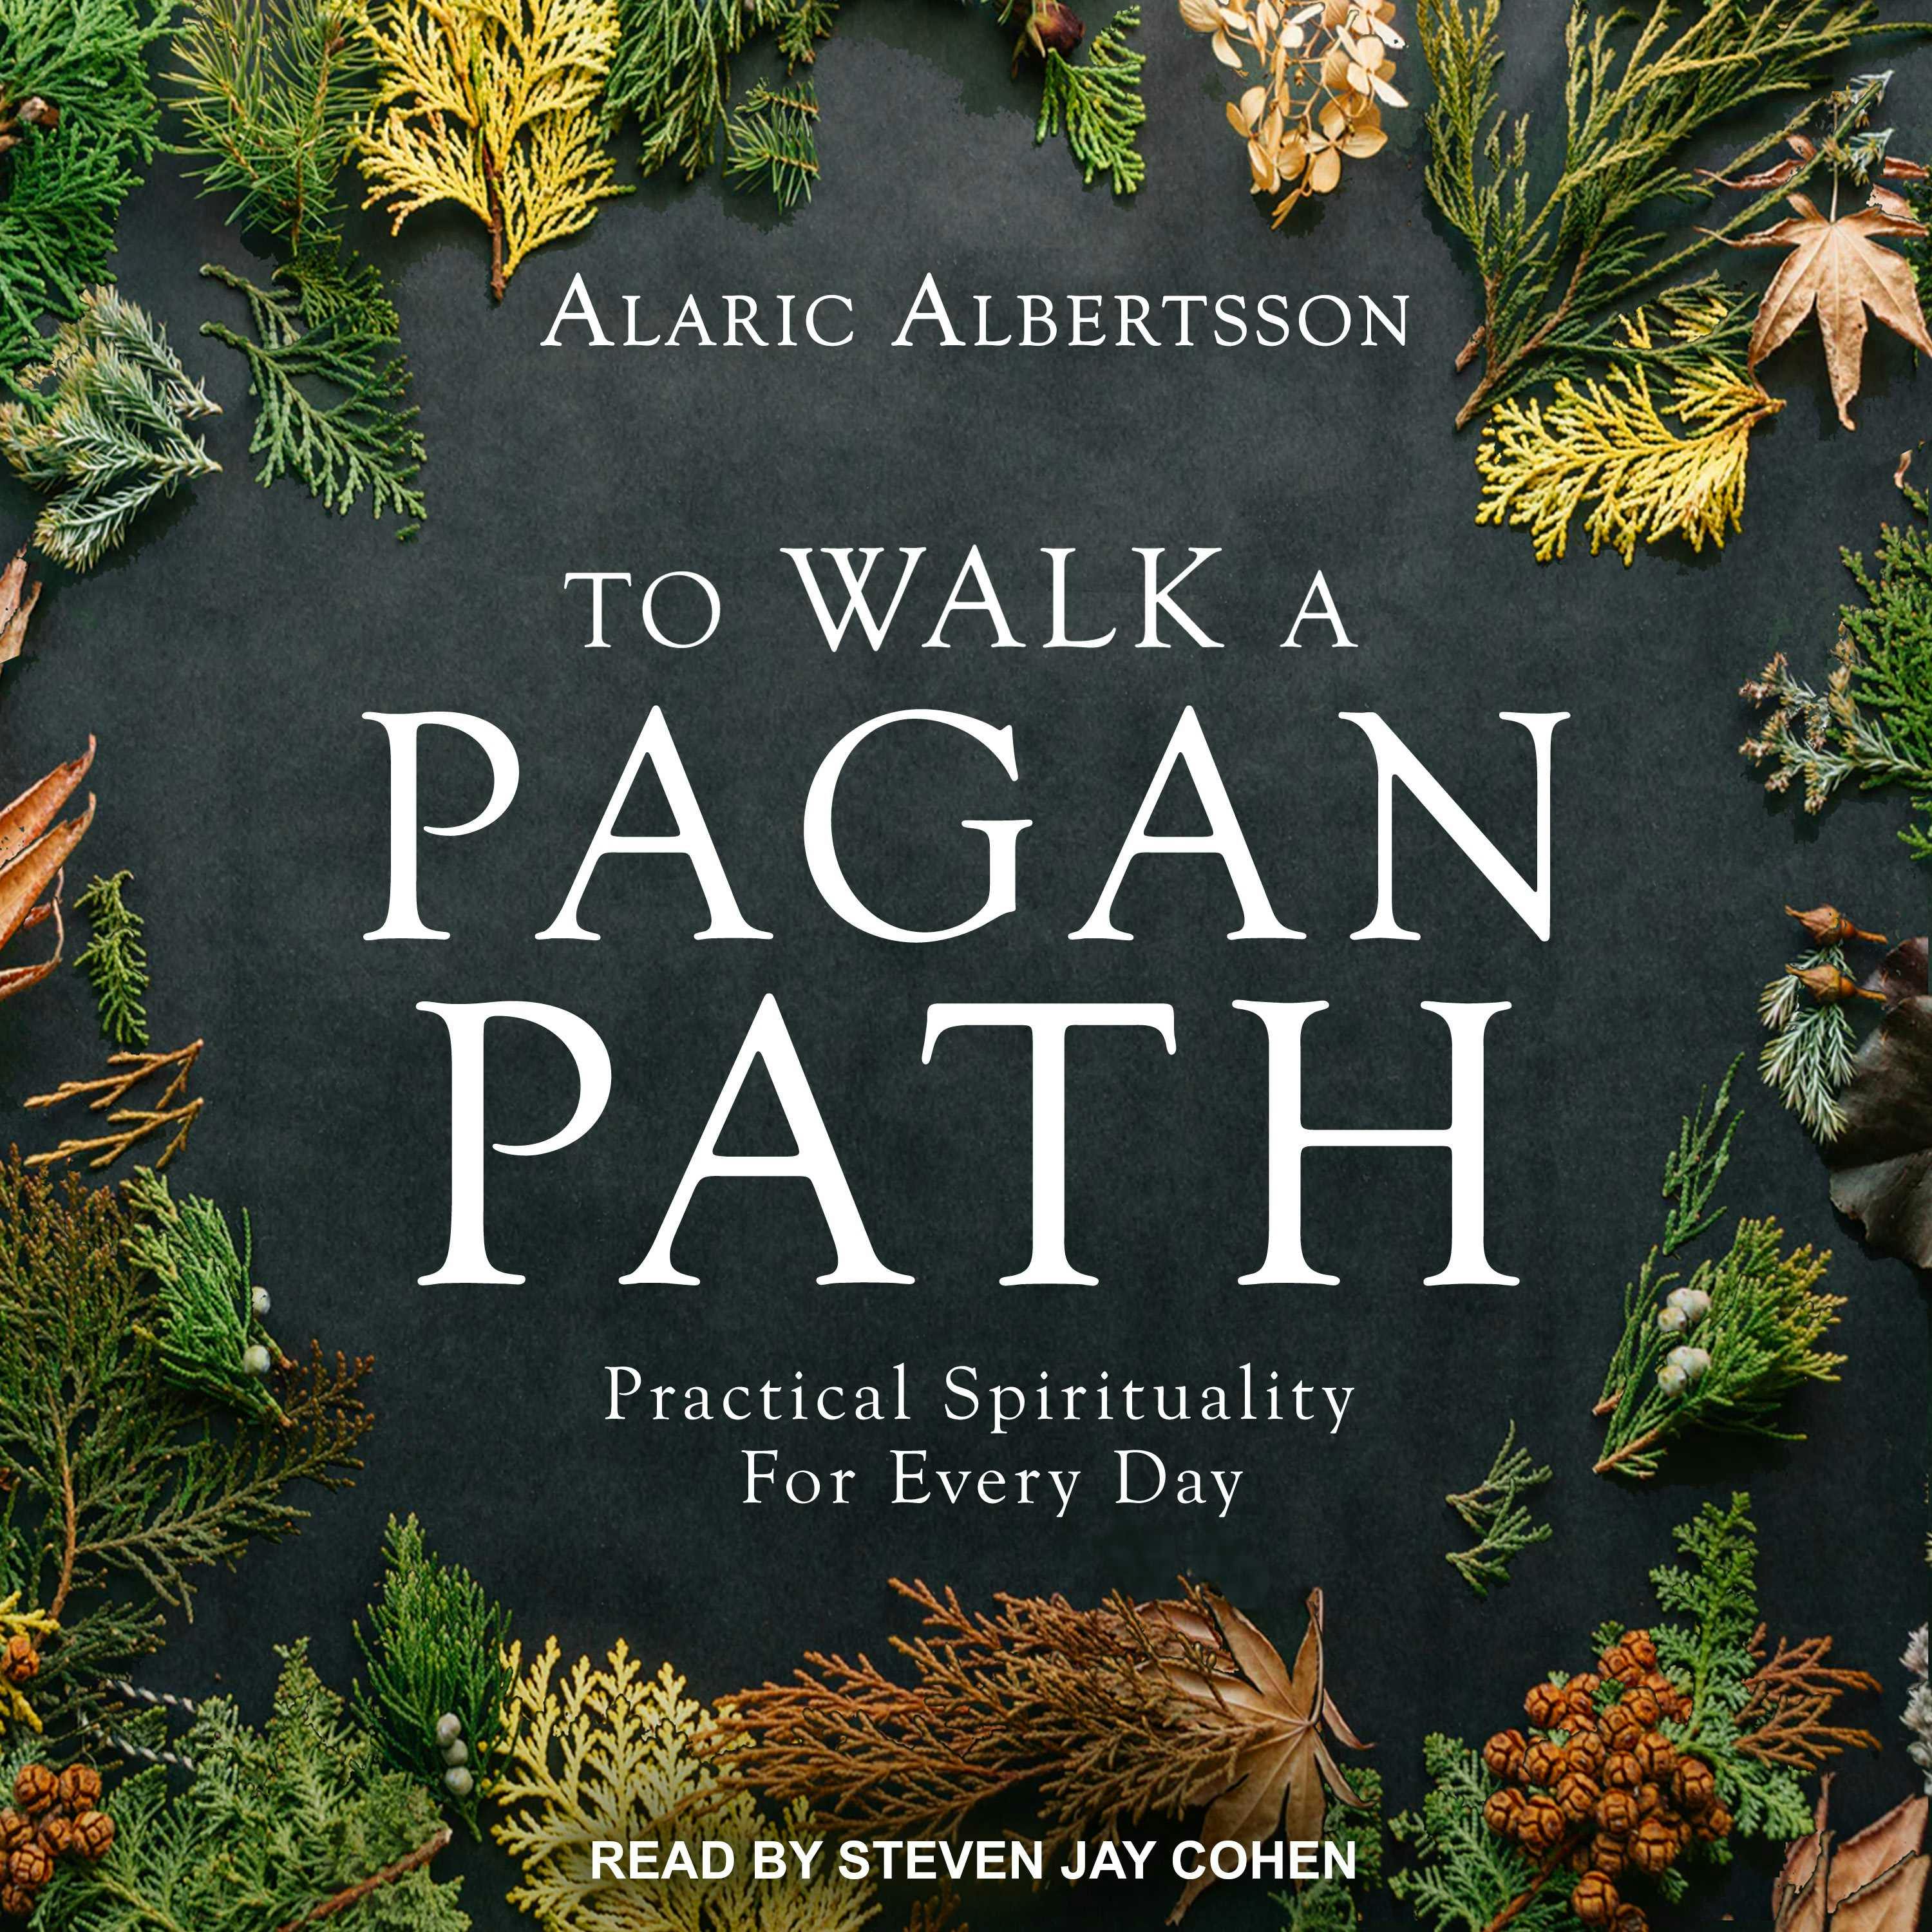 To Walk a Pagan Path: Practical Spirituality for Every Day - Alaric Albertsson